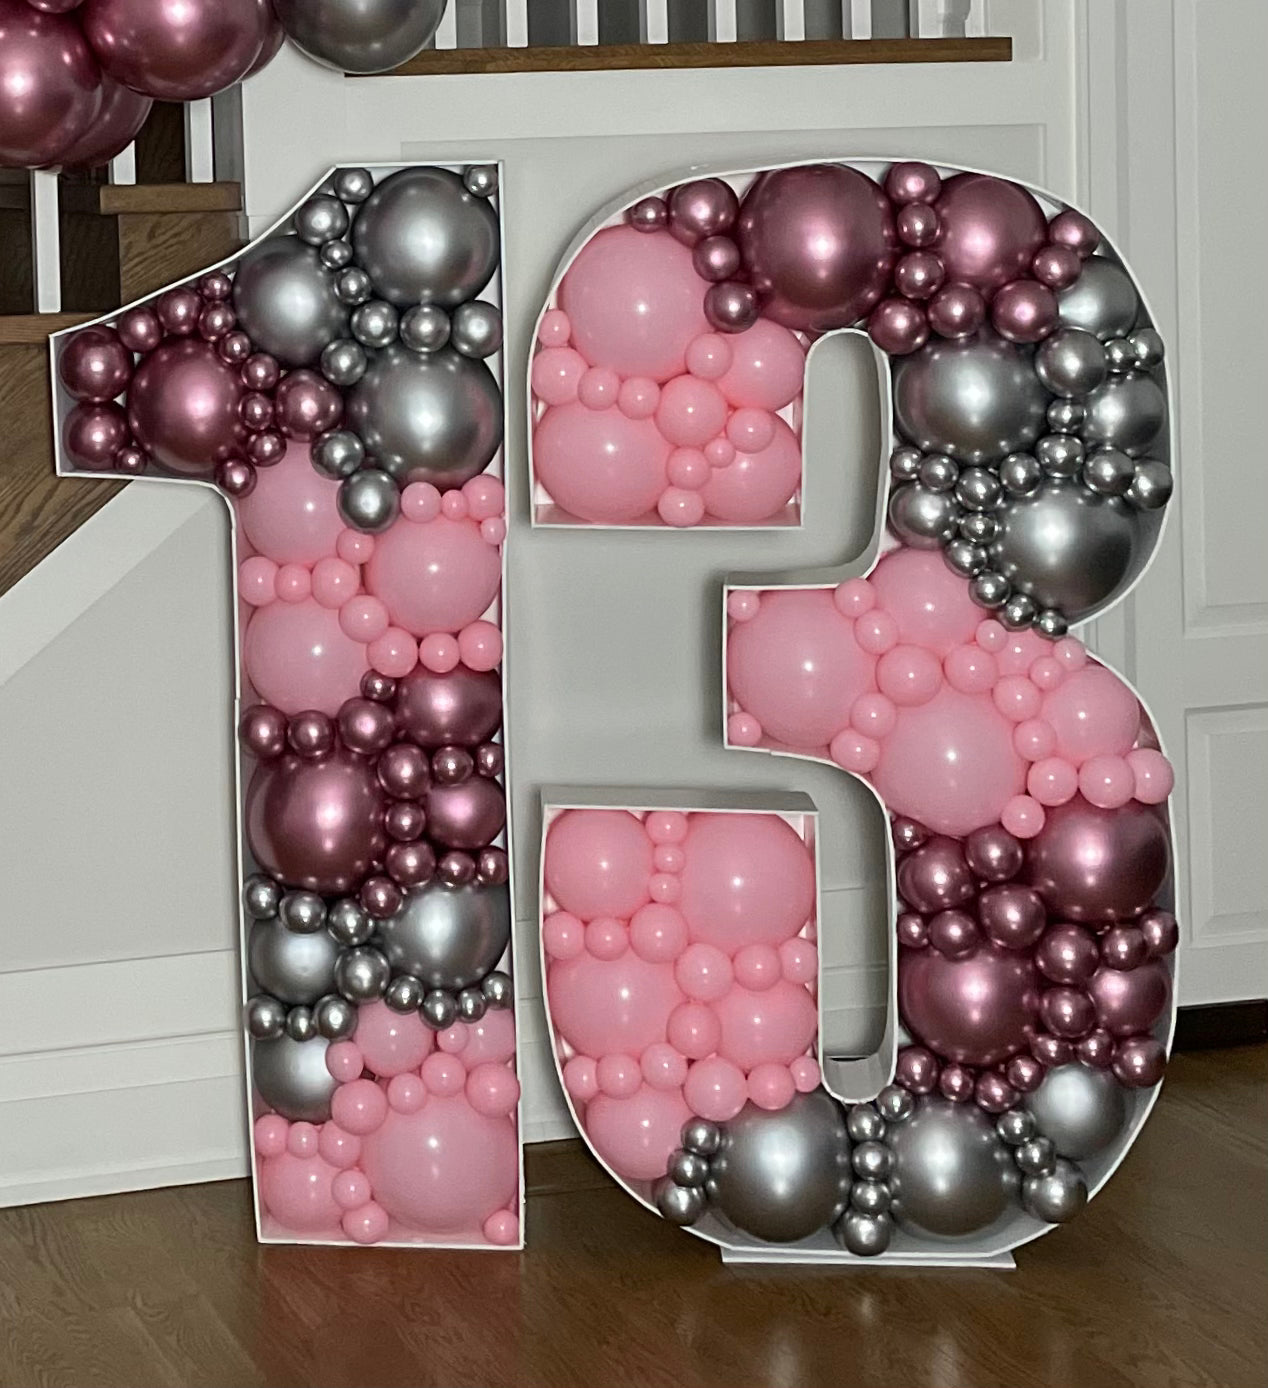 5 FT BALLOON MOSAIC $320 PER NUMBER/LETTER